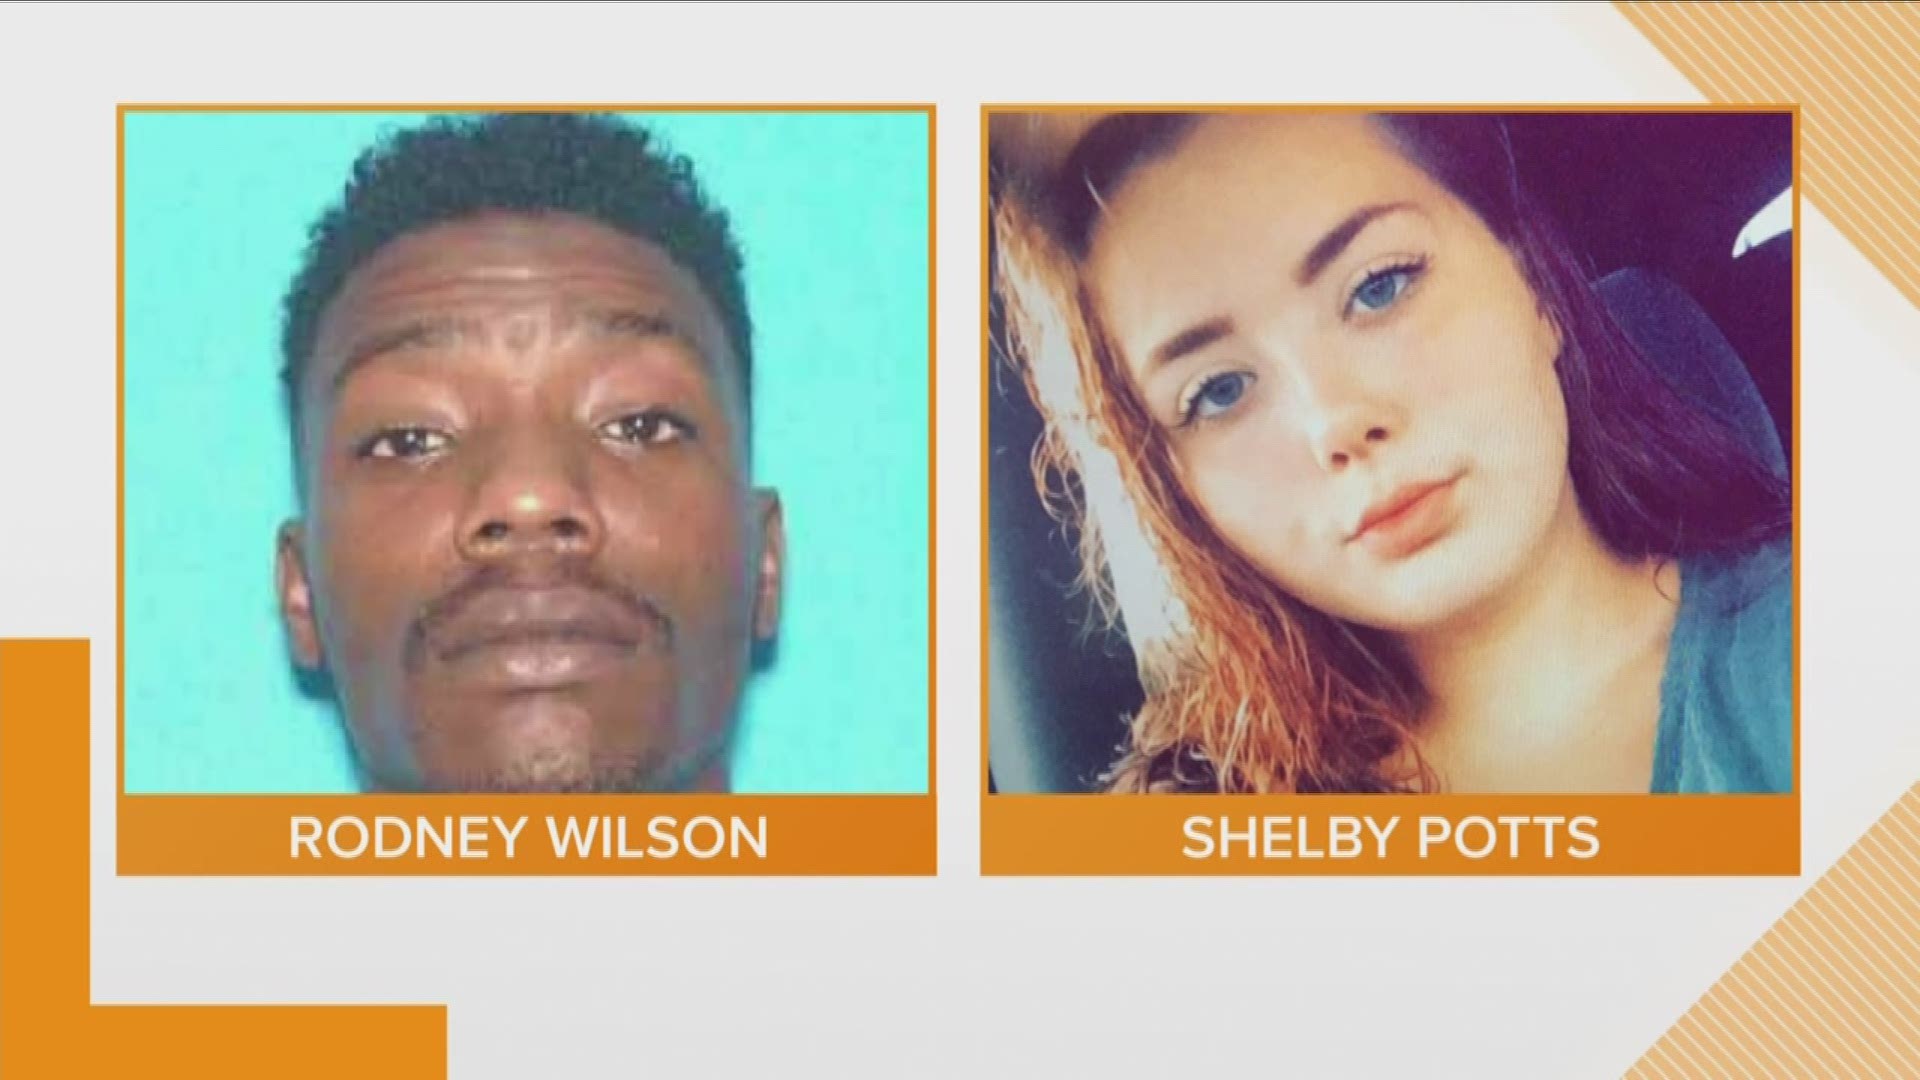 Wilson was wanted for attempted second degree murder in Paris, Tennessee.